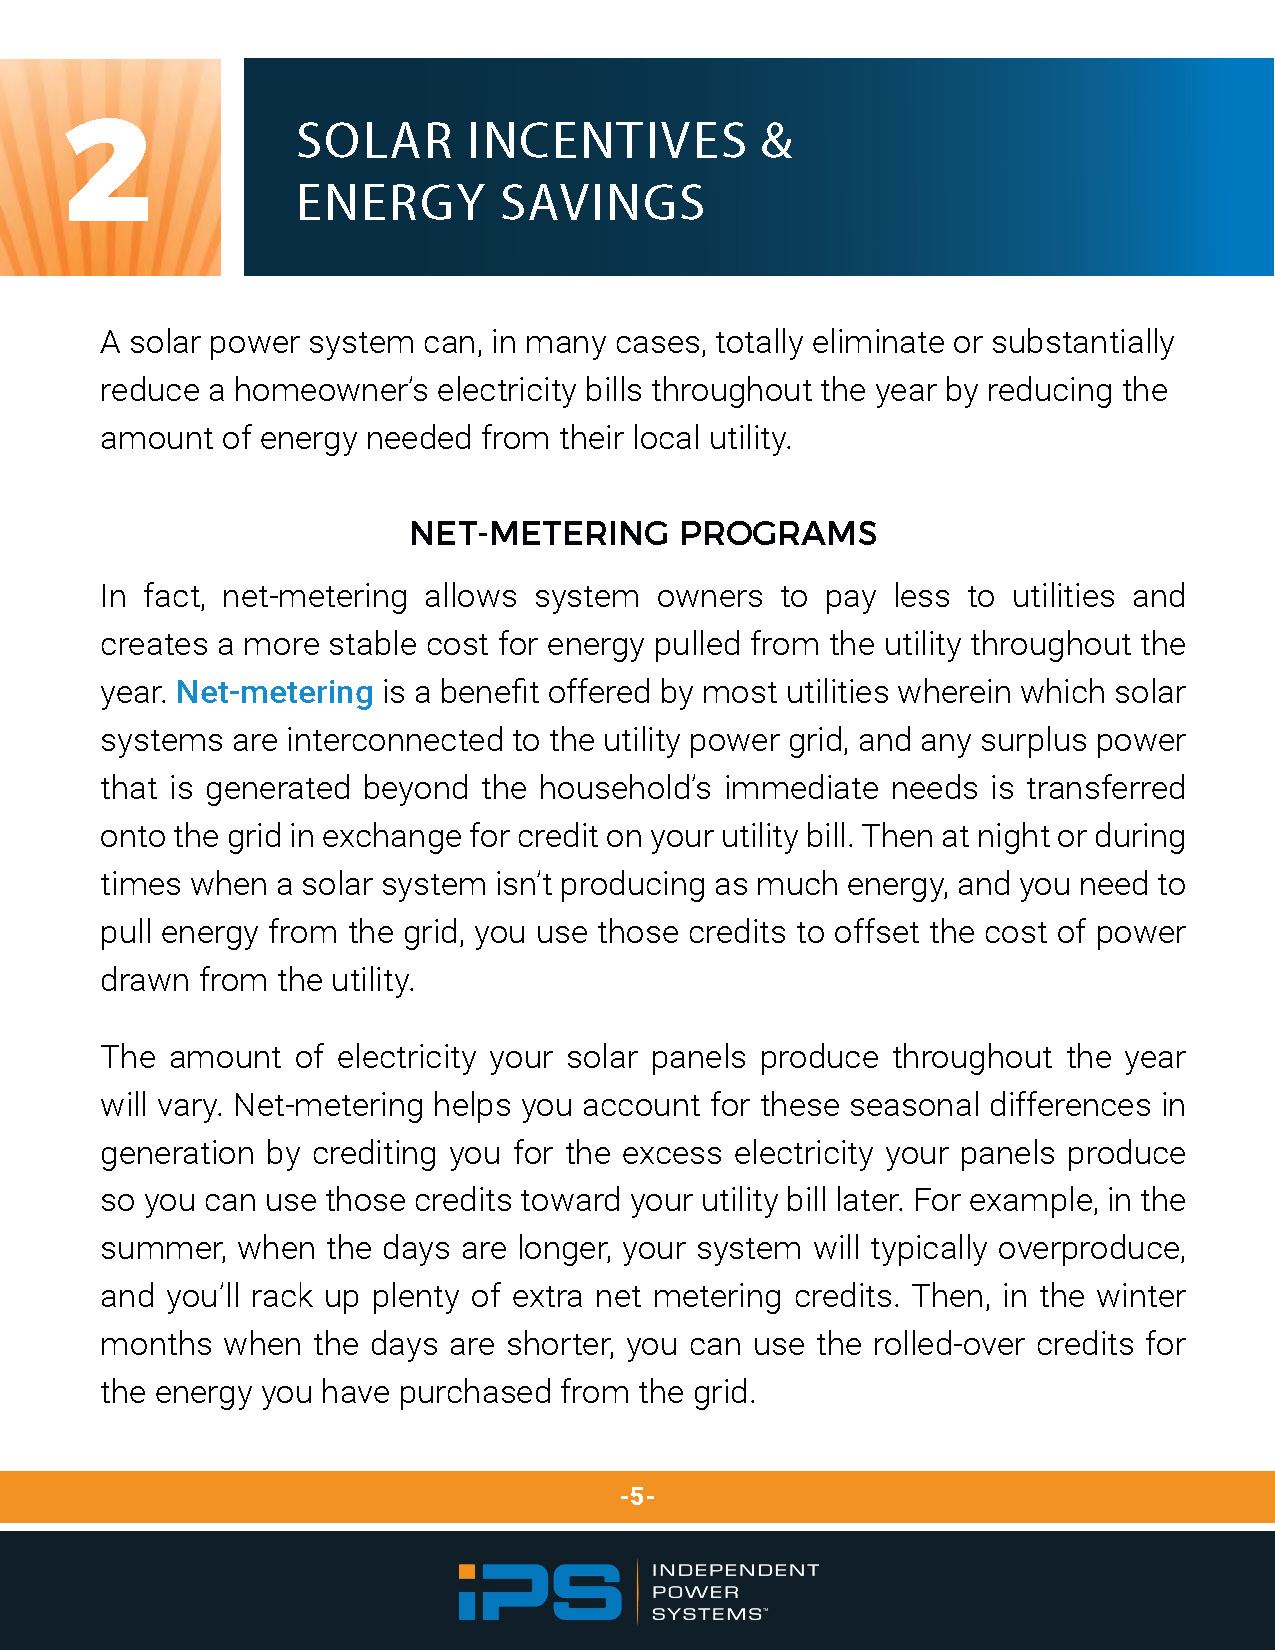 Pros Cons You Should Know Before Going Solar IPS-Ebook Page 05